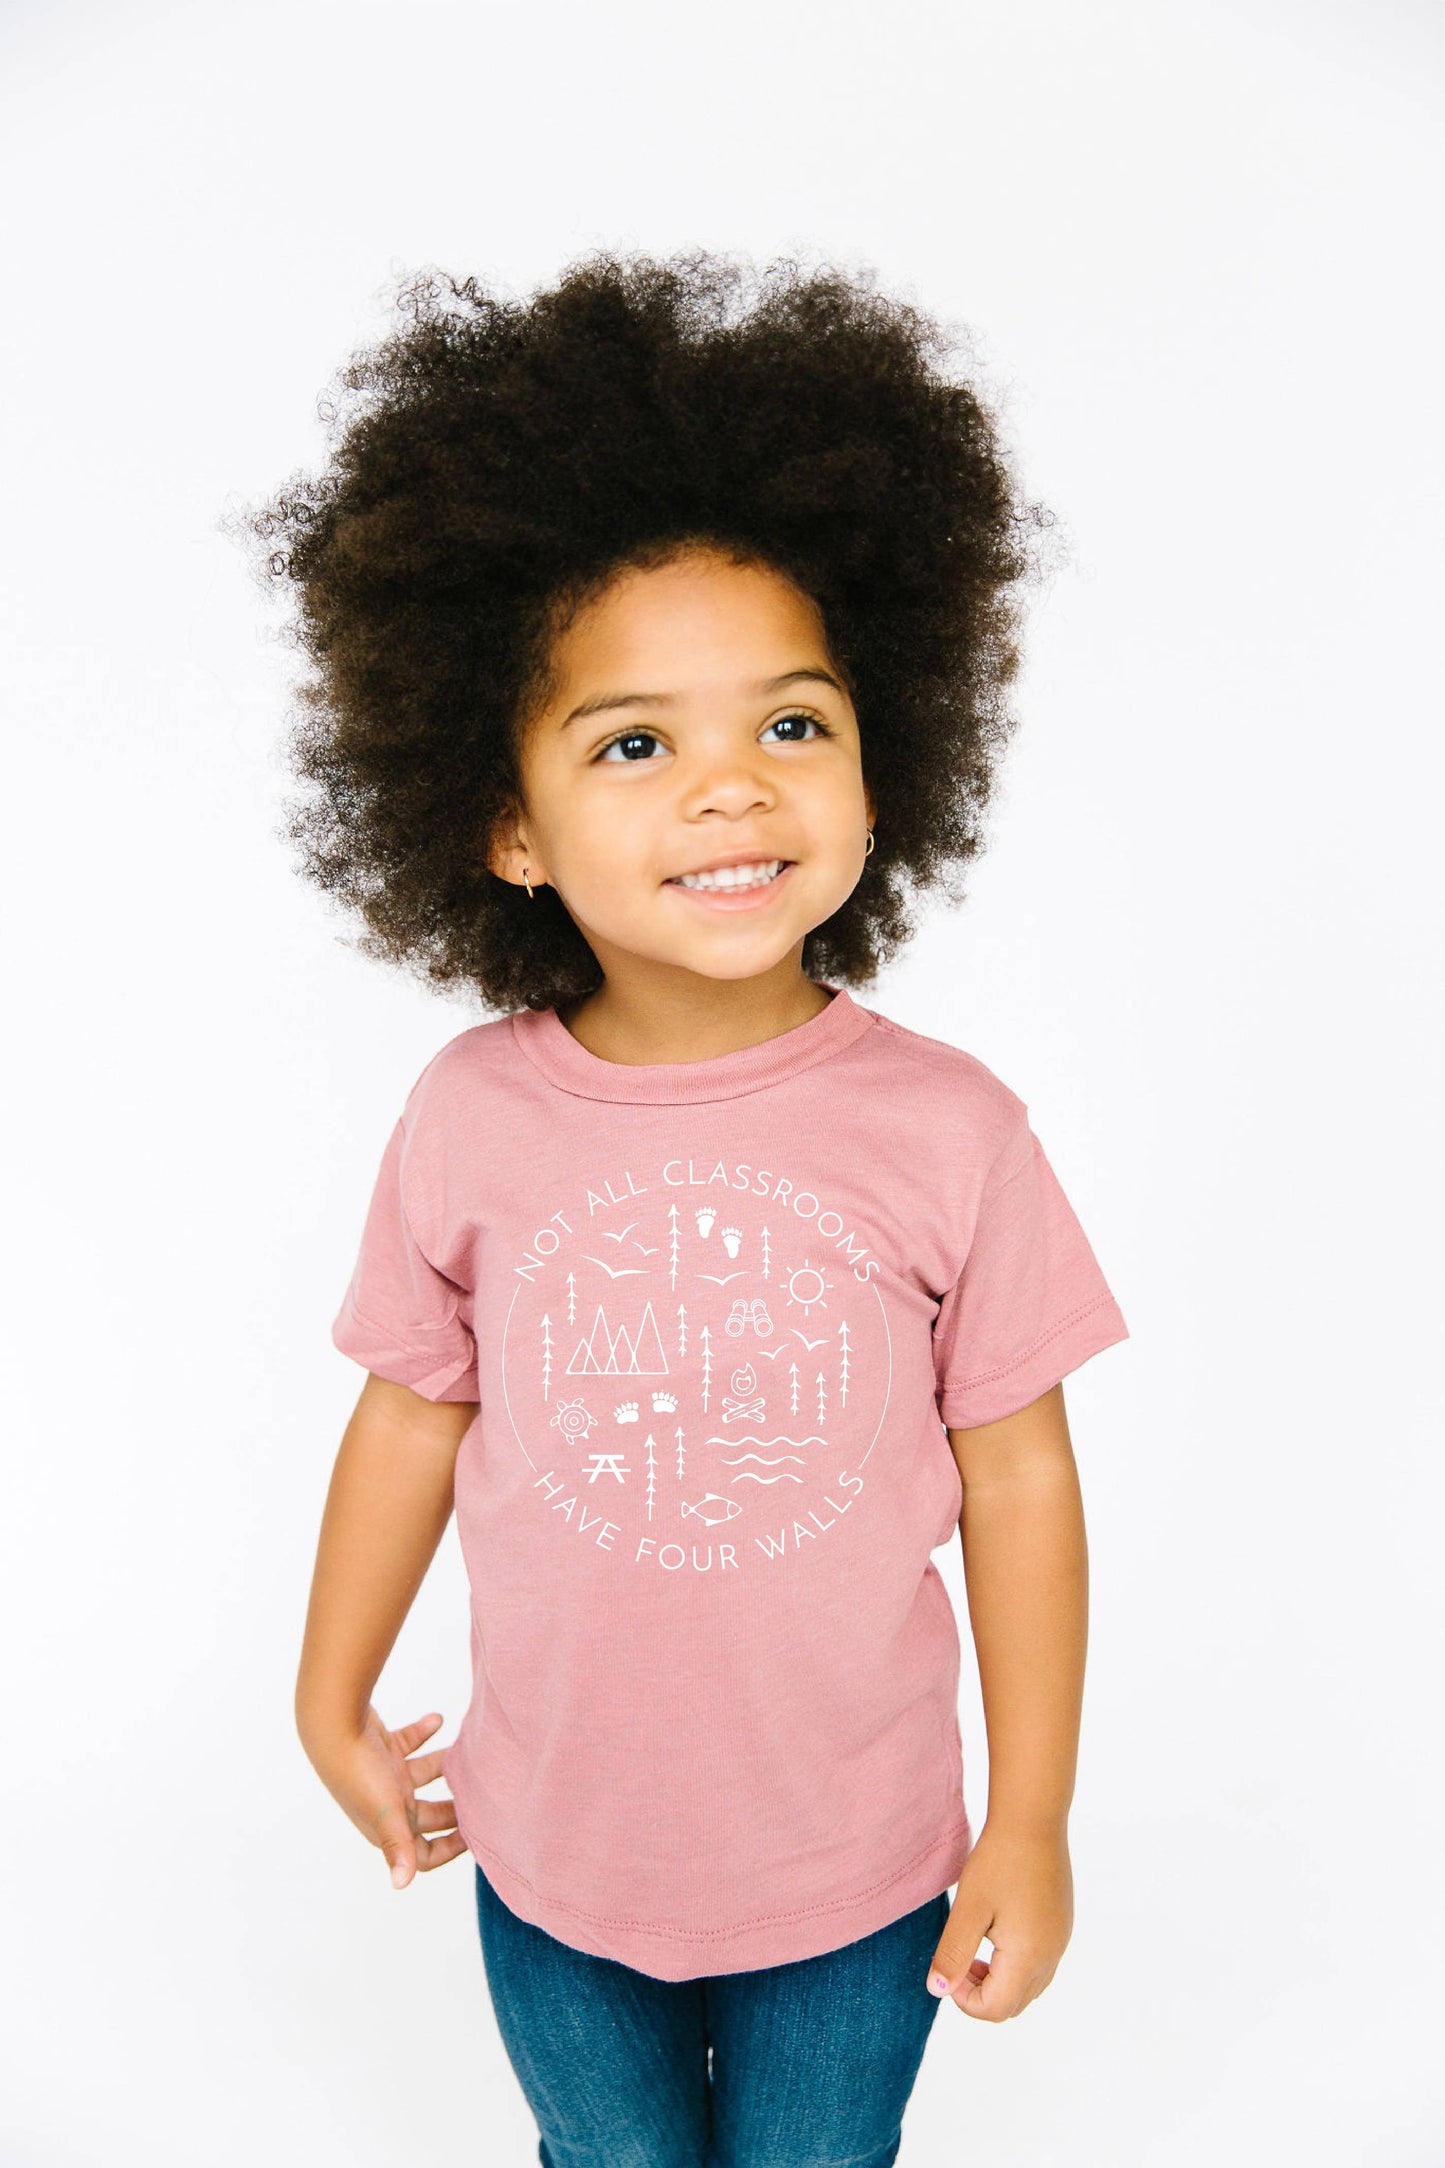 "Not All Classrooms Have Four Walls" Kids Graphic Tee